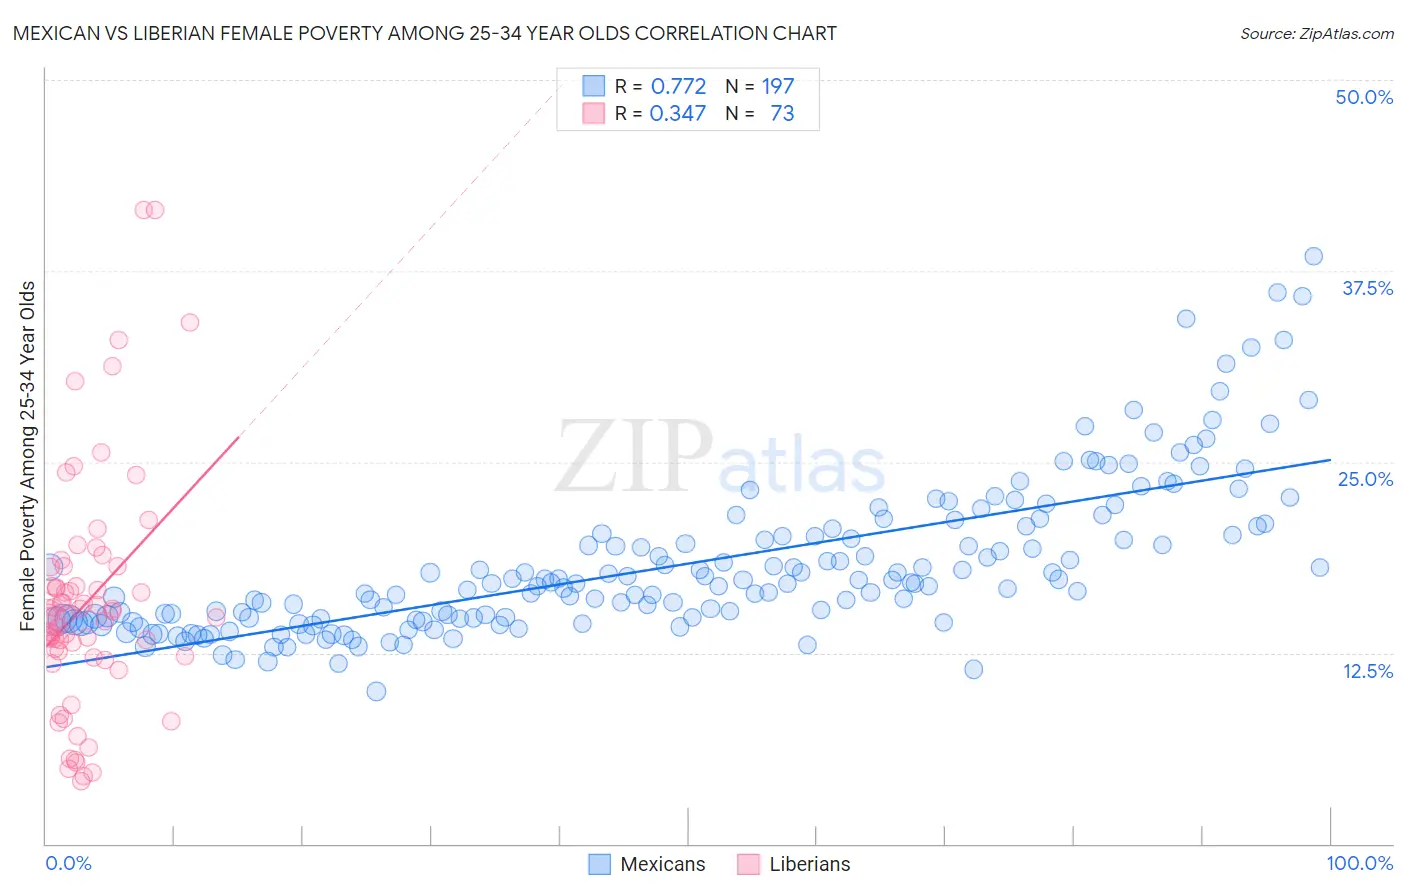 Mexican vs Liberian Female Poverty Among 25-34 Year Olds